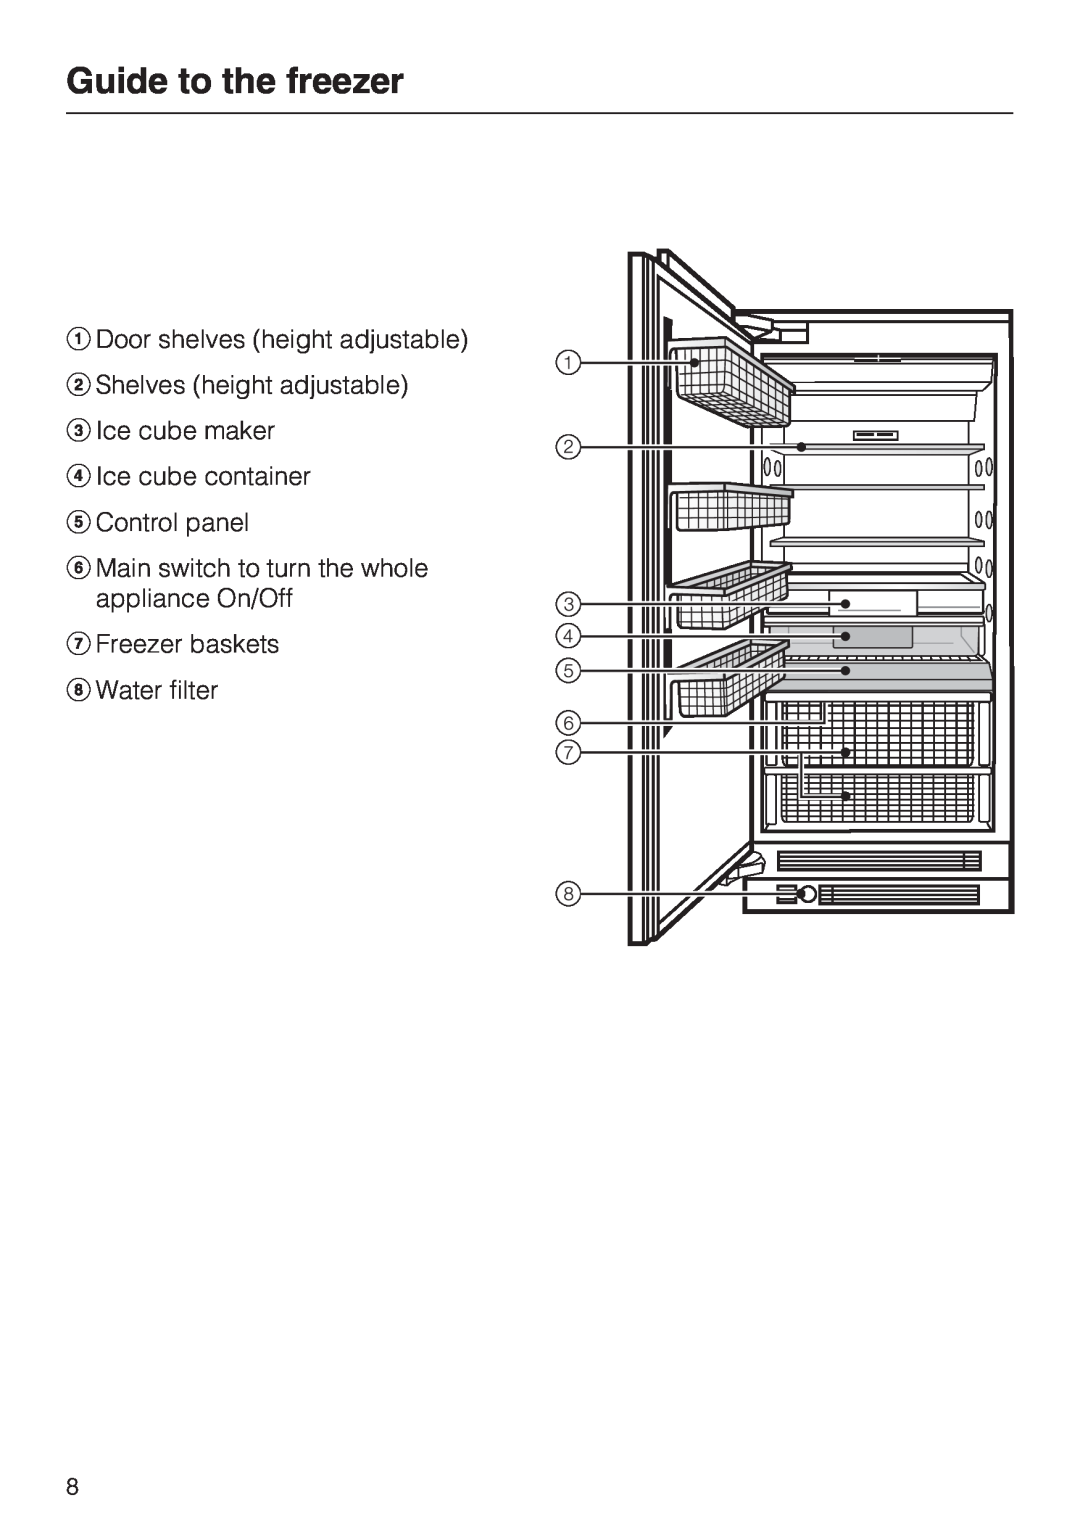 Miele F 1811 SF, F 1801 SF Guide to the freezer, Door shelves height adjustable, Shelves height adjustable Ice cube maker 